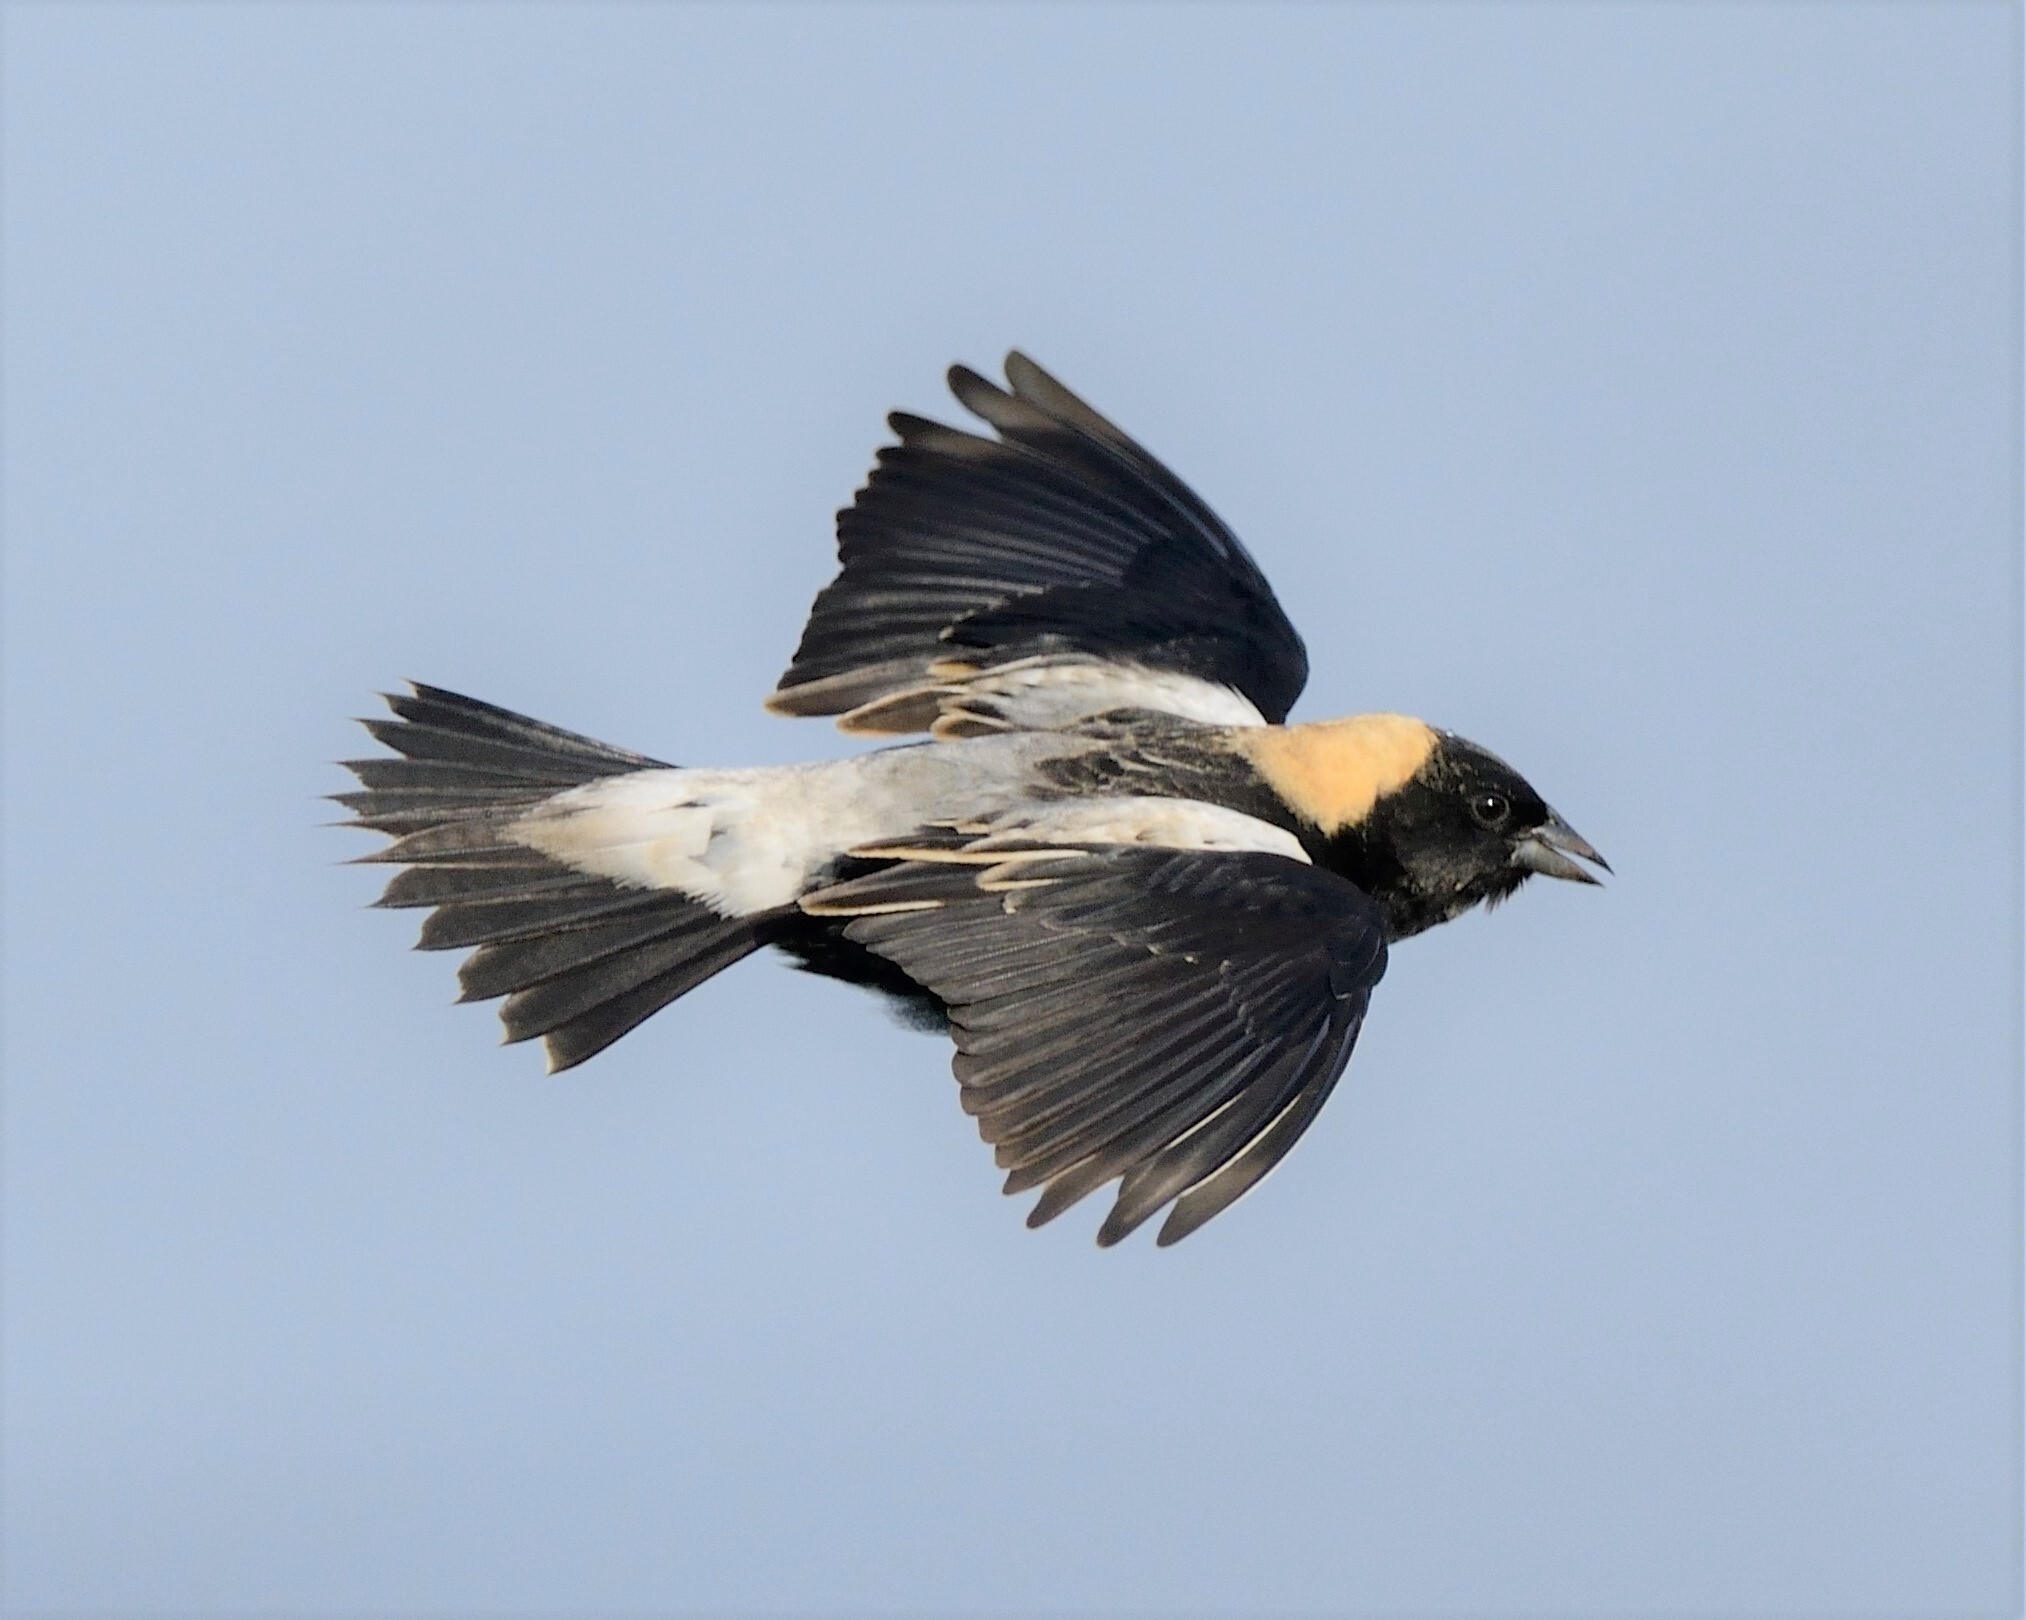 Bobolinks sometimes stop by the open areas of Governors Island during migration. Photo: JanetandPhil/CC BY-NC-ND 2.0